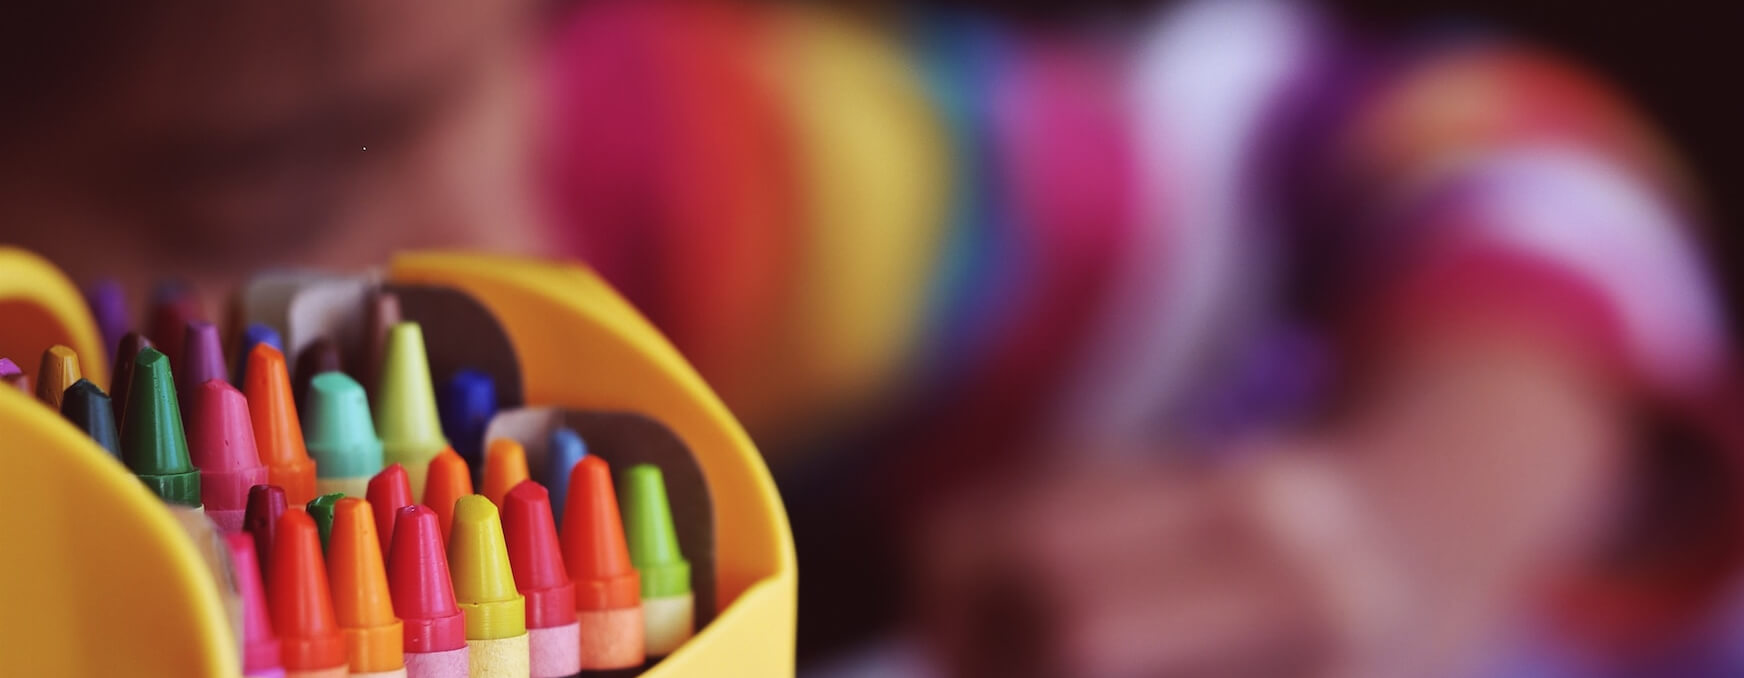 the image shows crayons and a child colouring in the background which represents our free creative support services for children impacted by mental health needs.